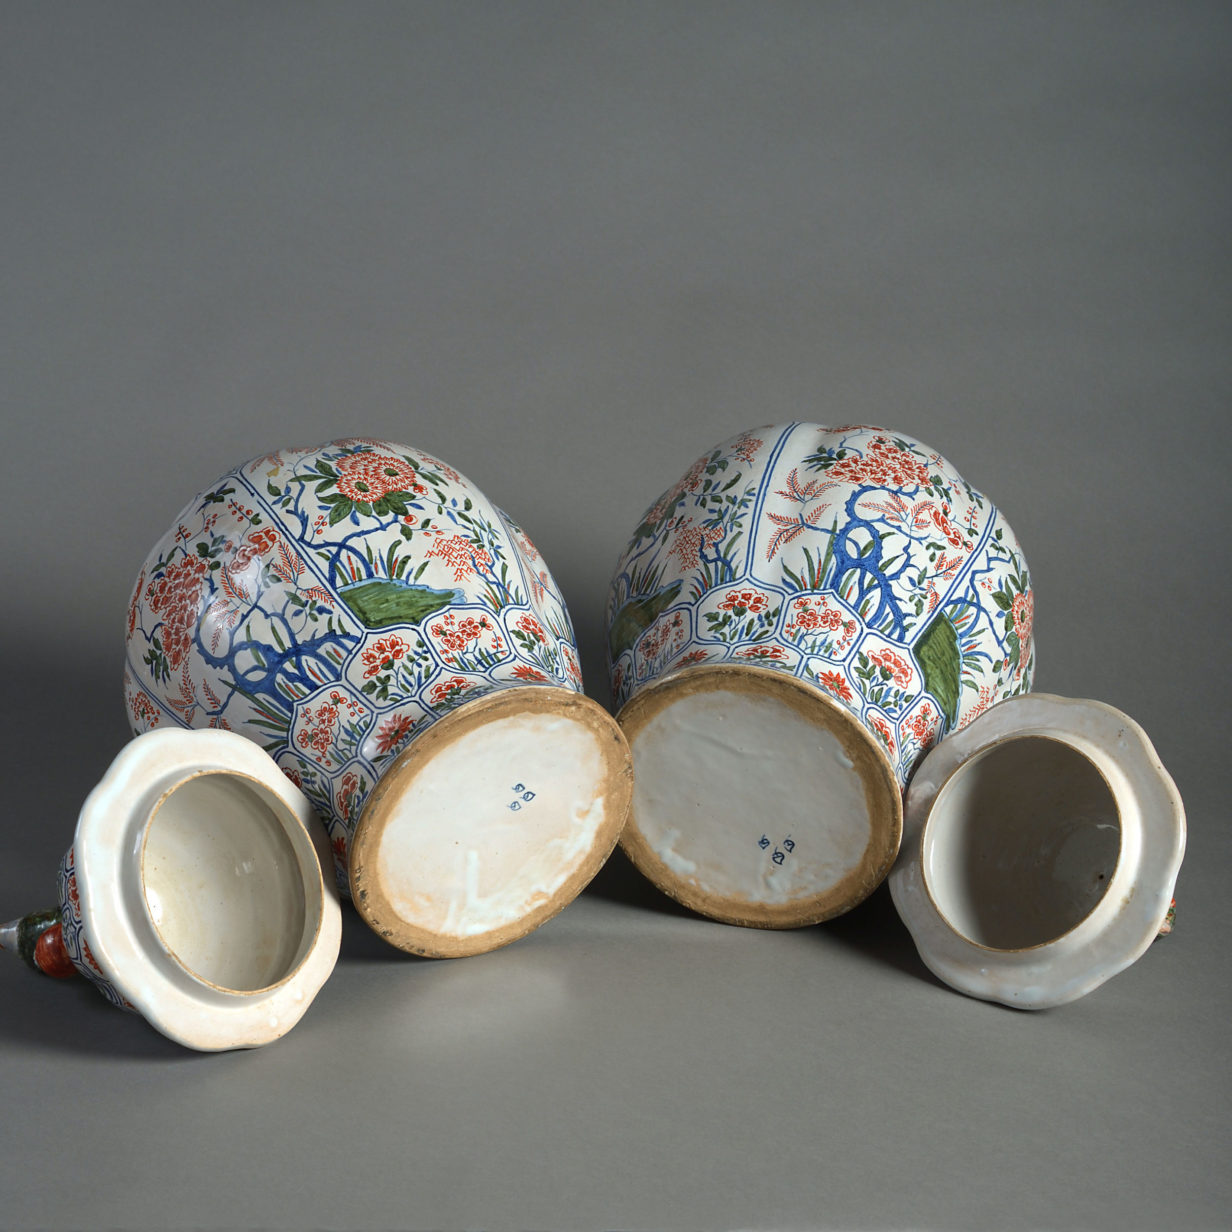 Late 19th century pair of faience pottery vases